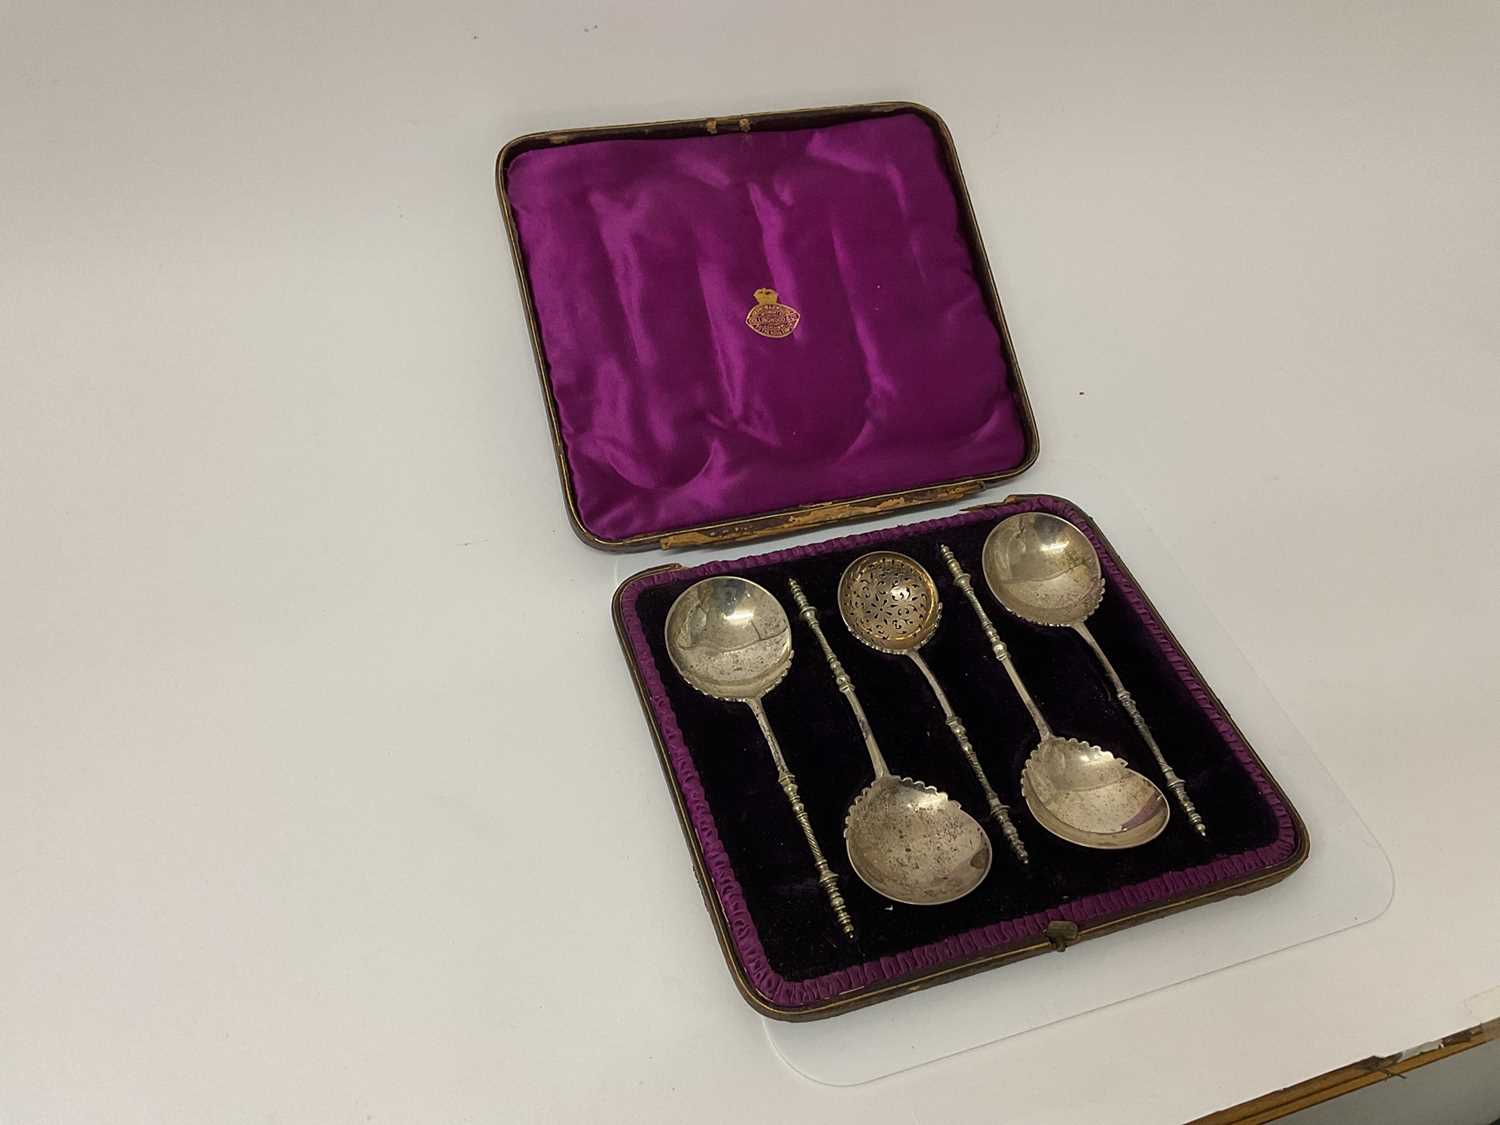 Lot 53 - Victorian silver fruit/dessert set comprising four serving spoons and a matching sifter spoon, (London 1887), maker John Aldwinckle & Thomas Slater